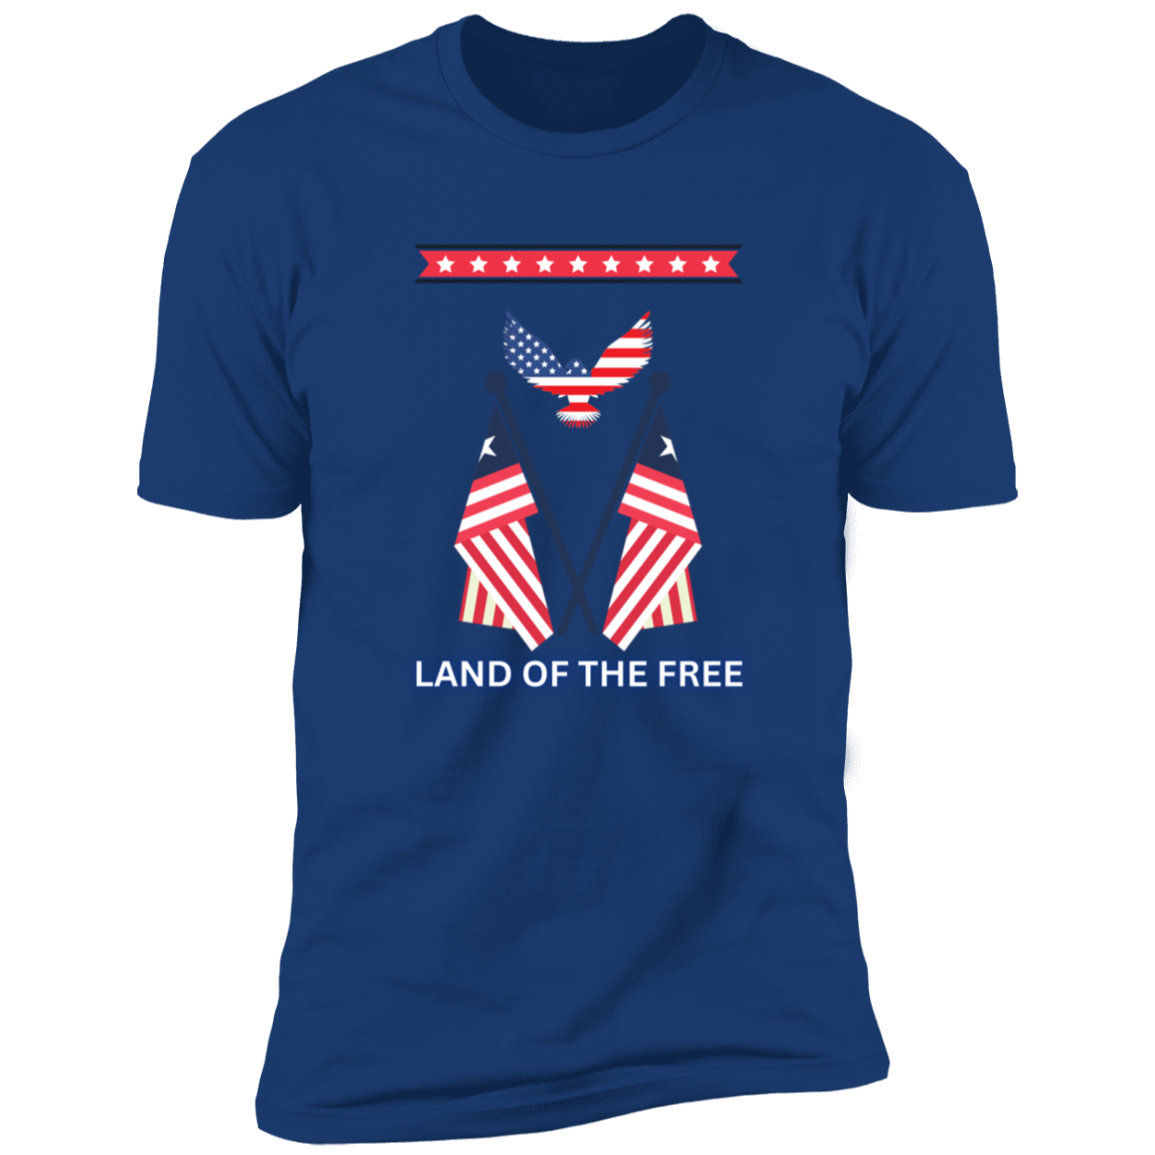 T-Shirt - Land Of The Free